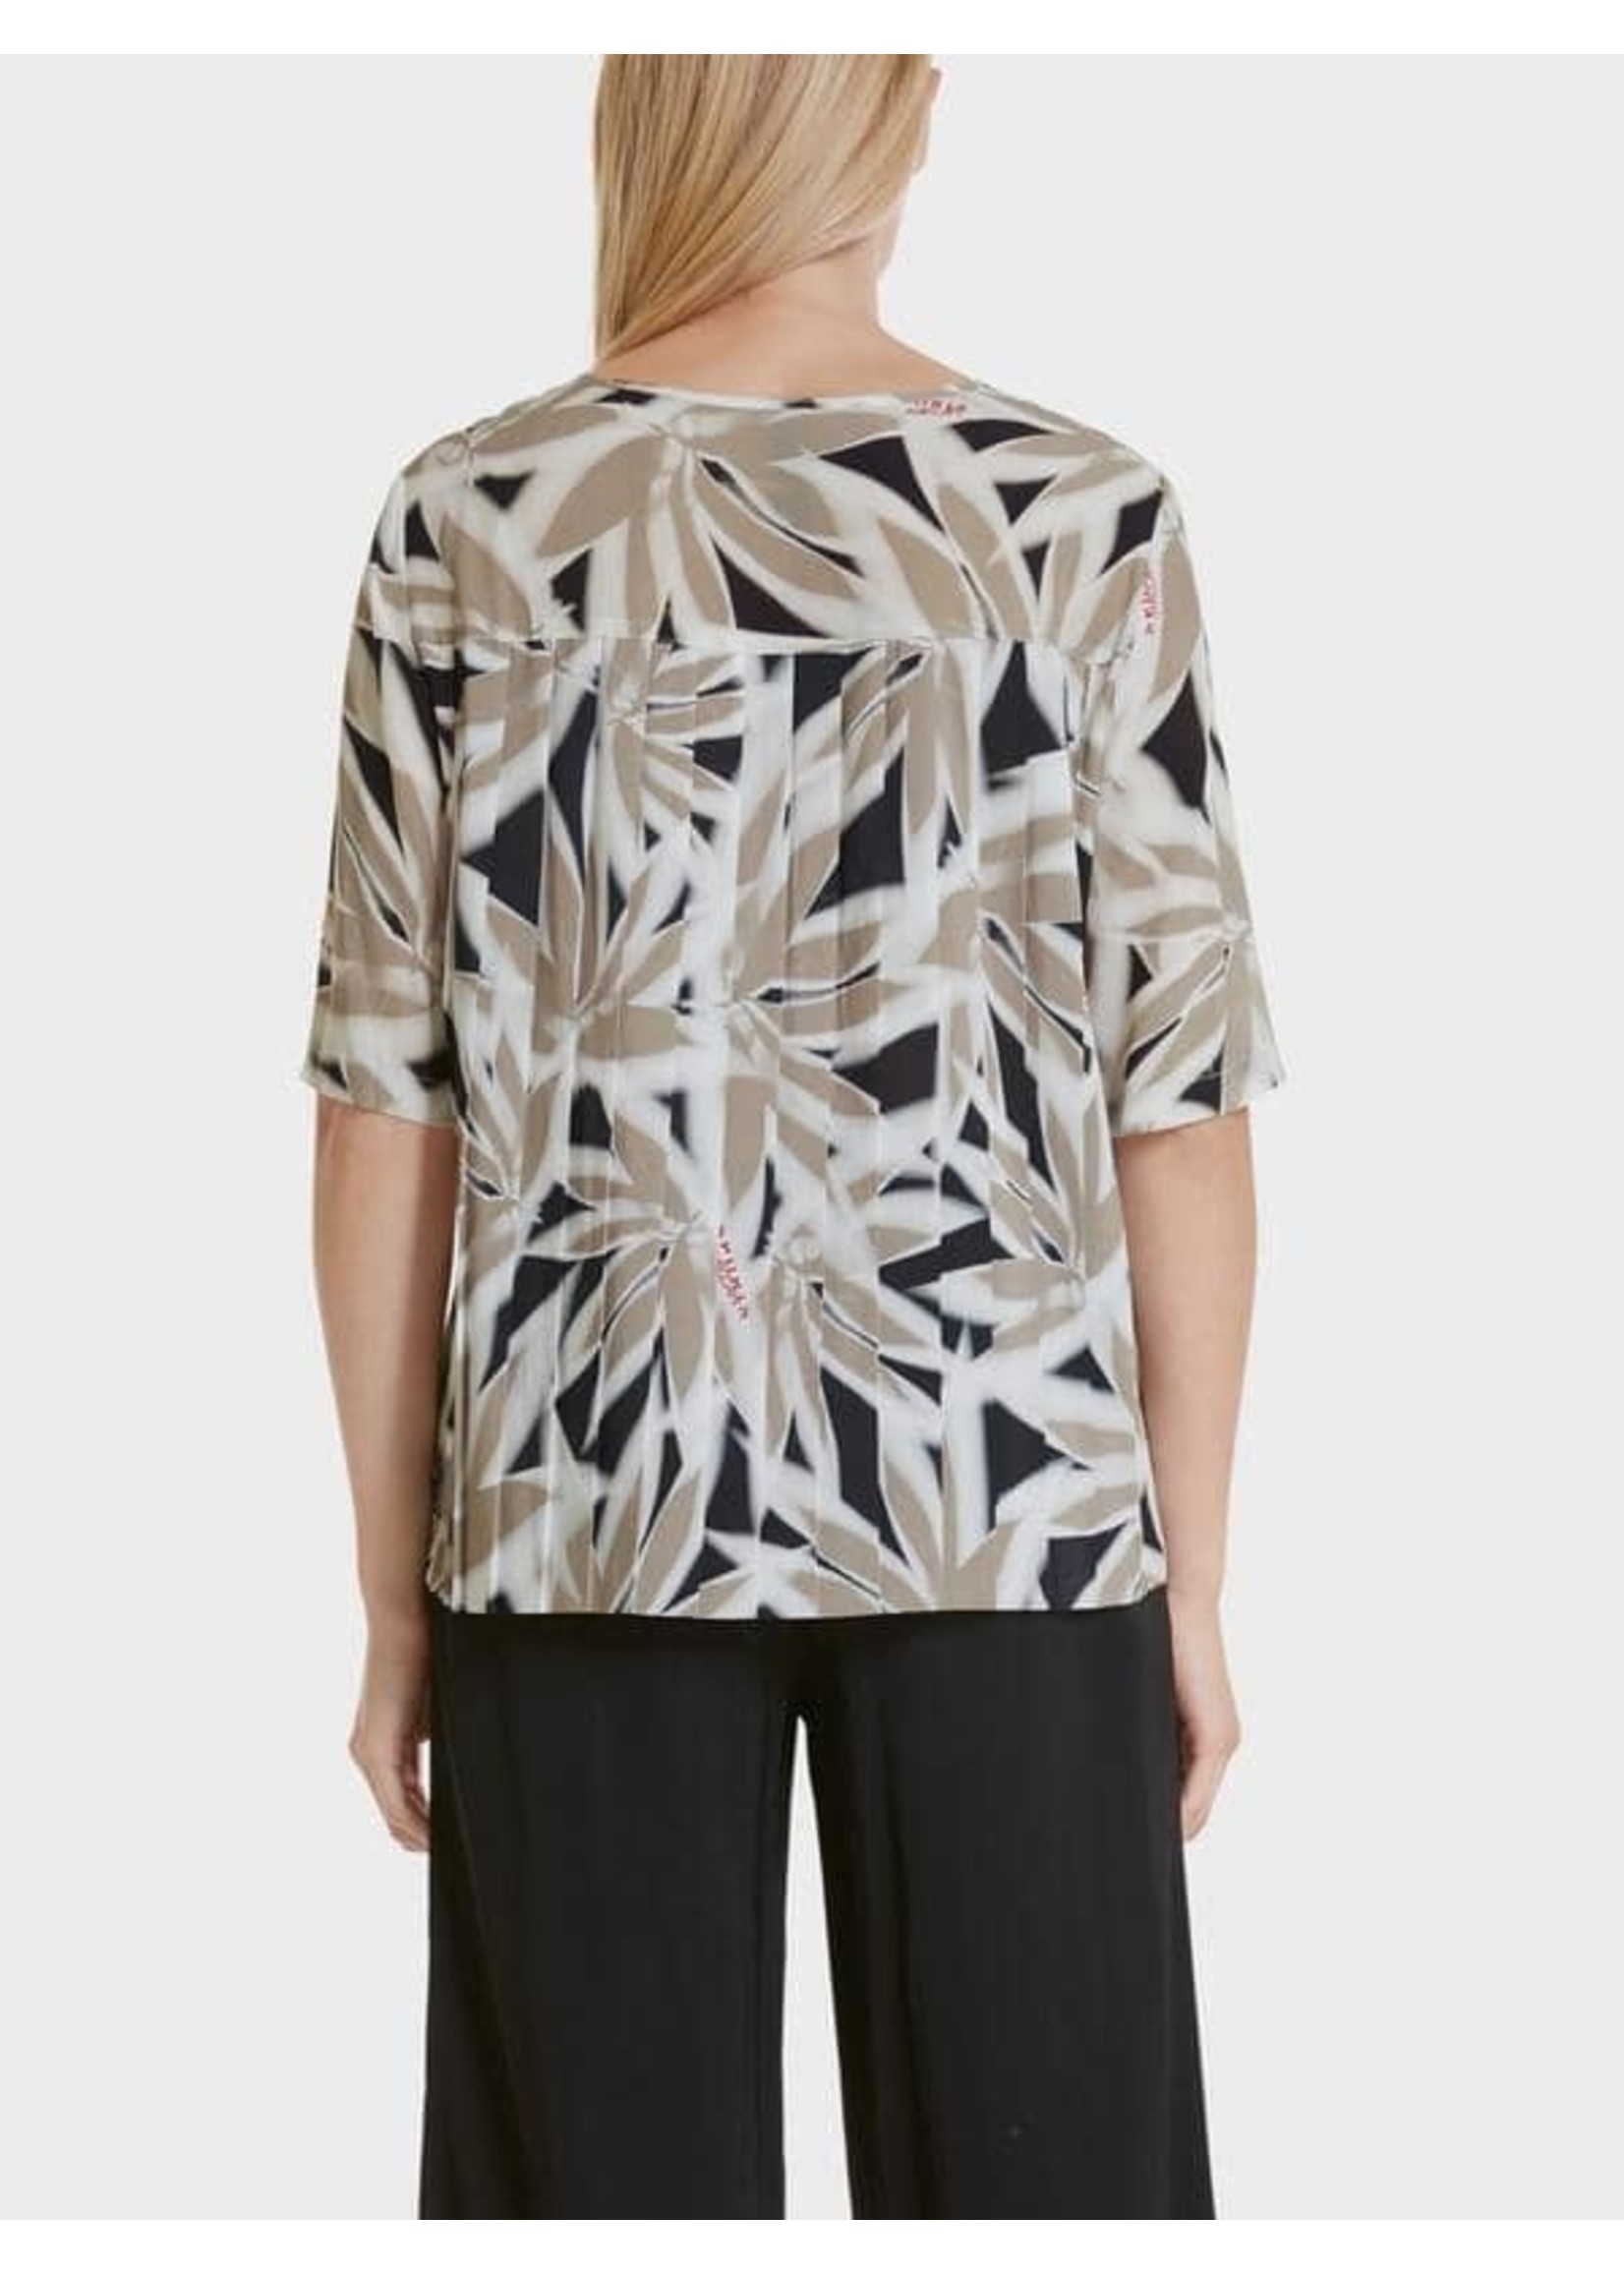 Marccain Sports Blouse SS 55.02 W79 900